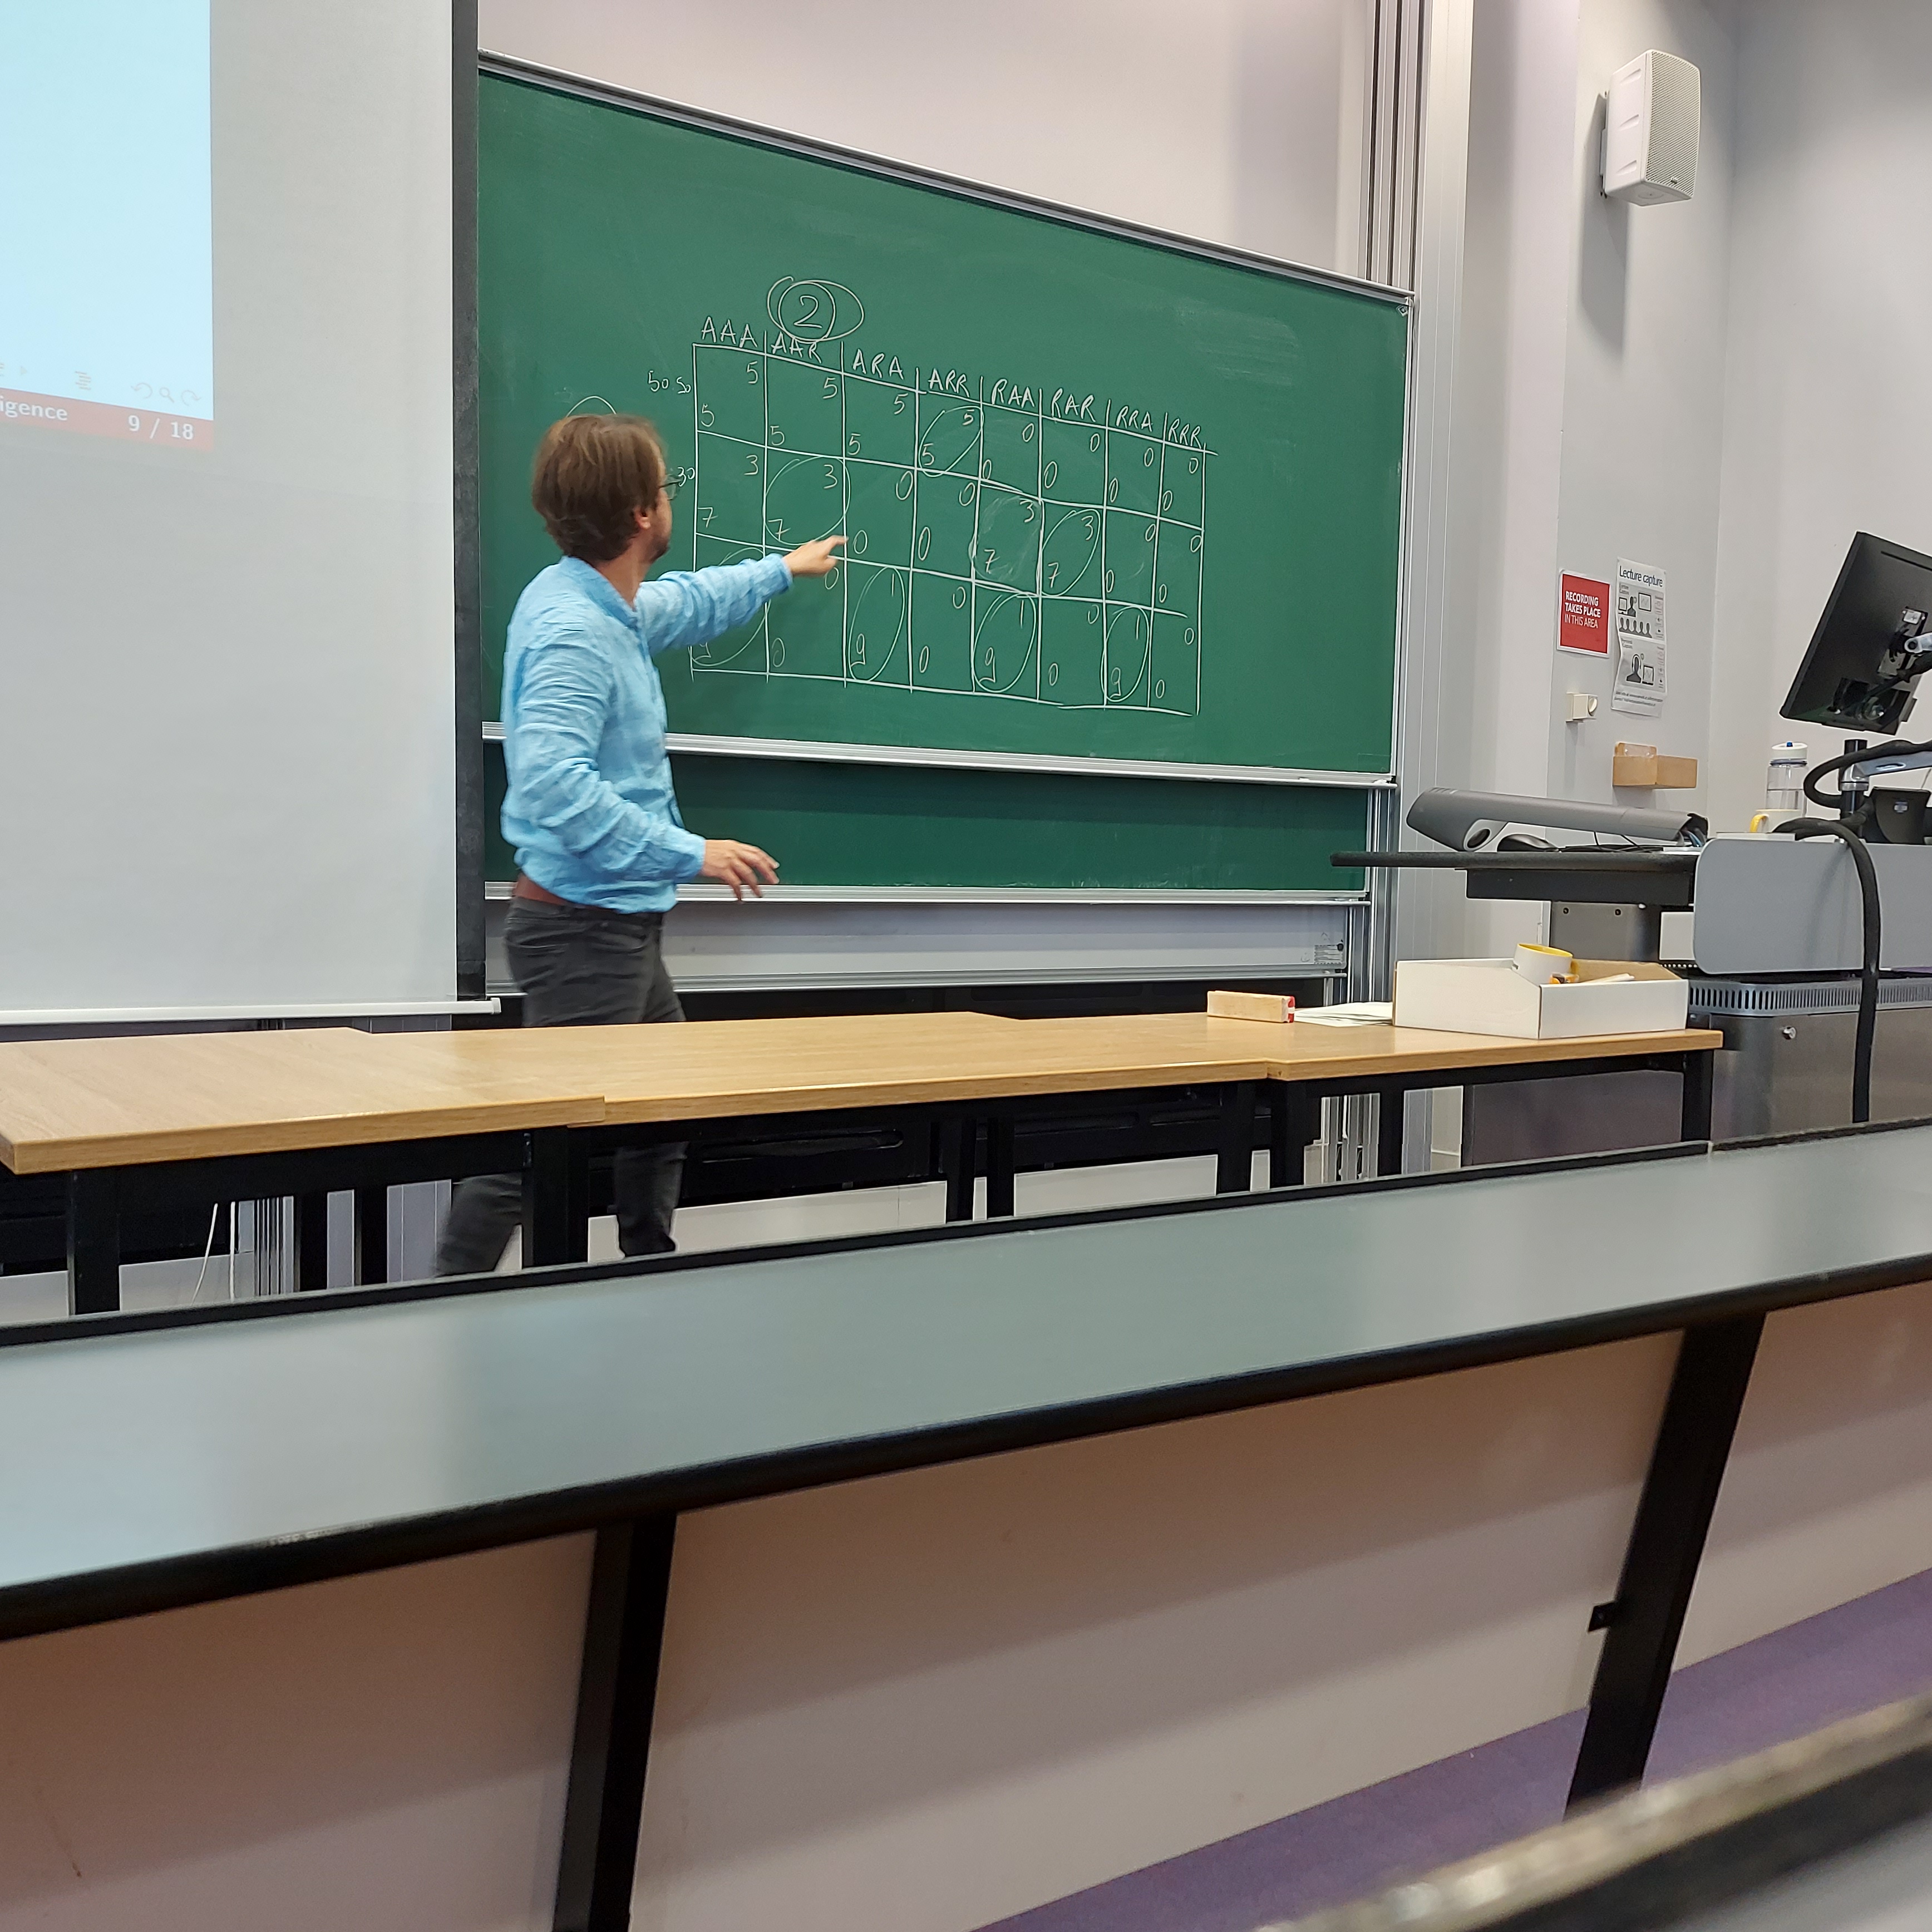 IMage of lecture teaching a class with writing on whiteboard